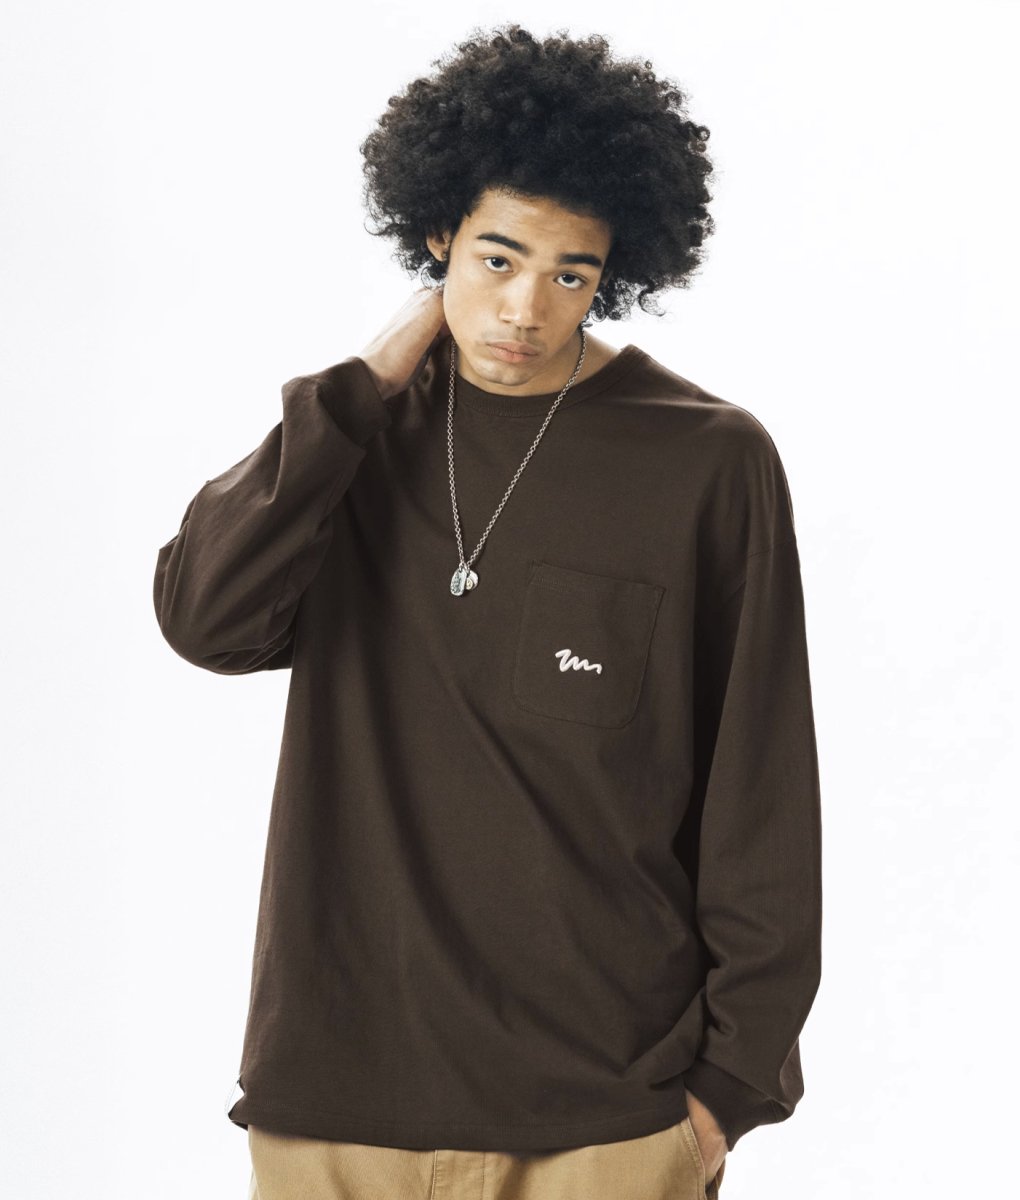 【260G】Pocket embroidery long sleeve T-shirt N2536